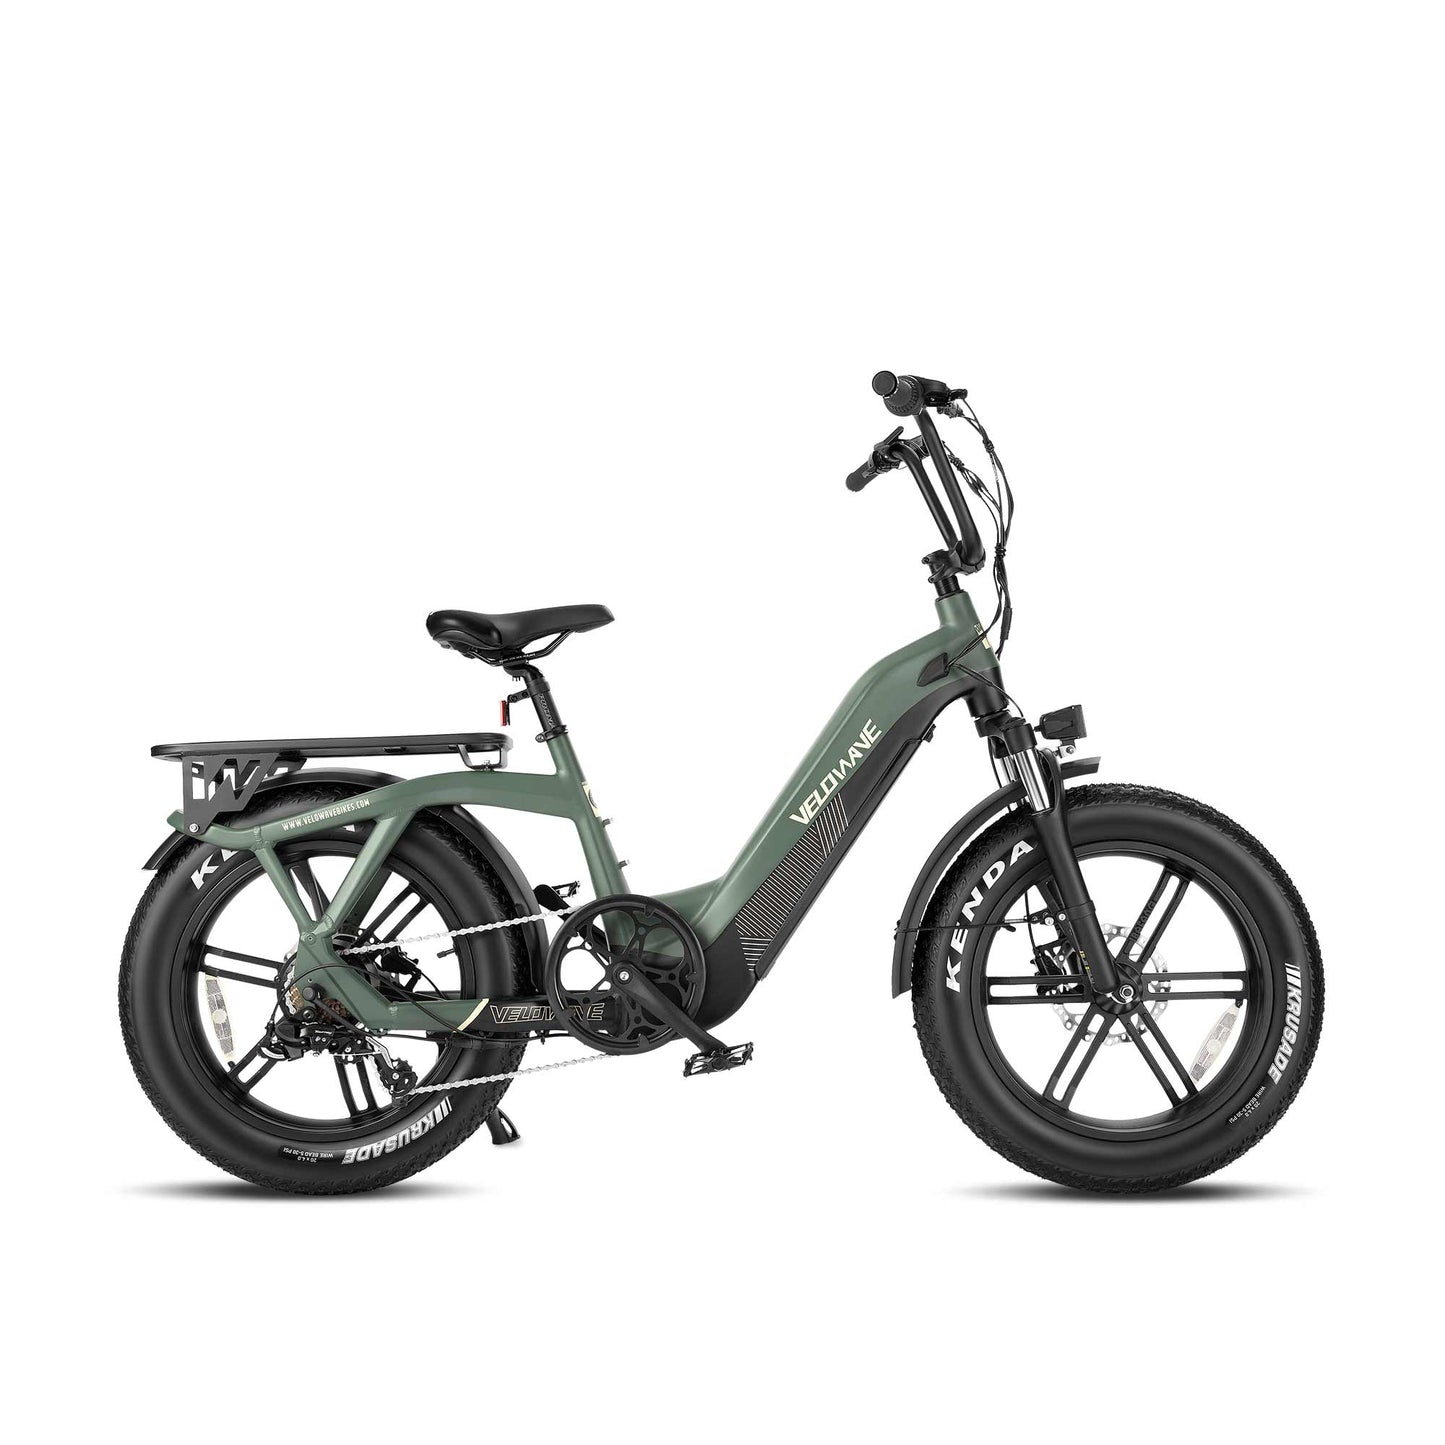 Velowave Pony Step Thru Electric Bike 20" Fat Tire 750W Motor with Suspension Fork for Comfort Riding